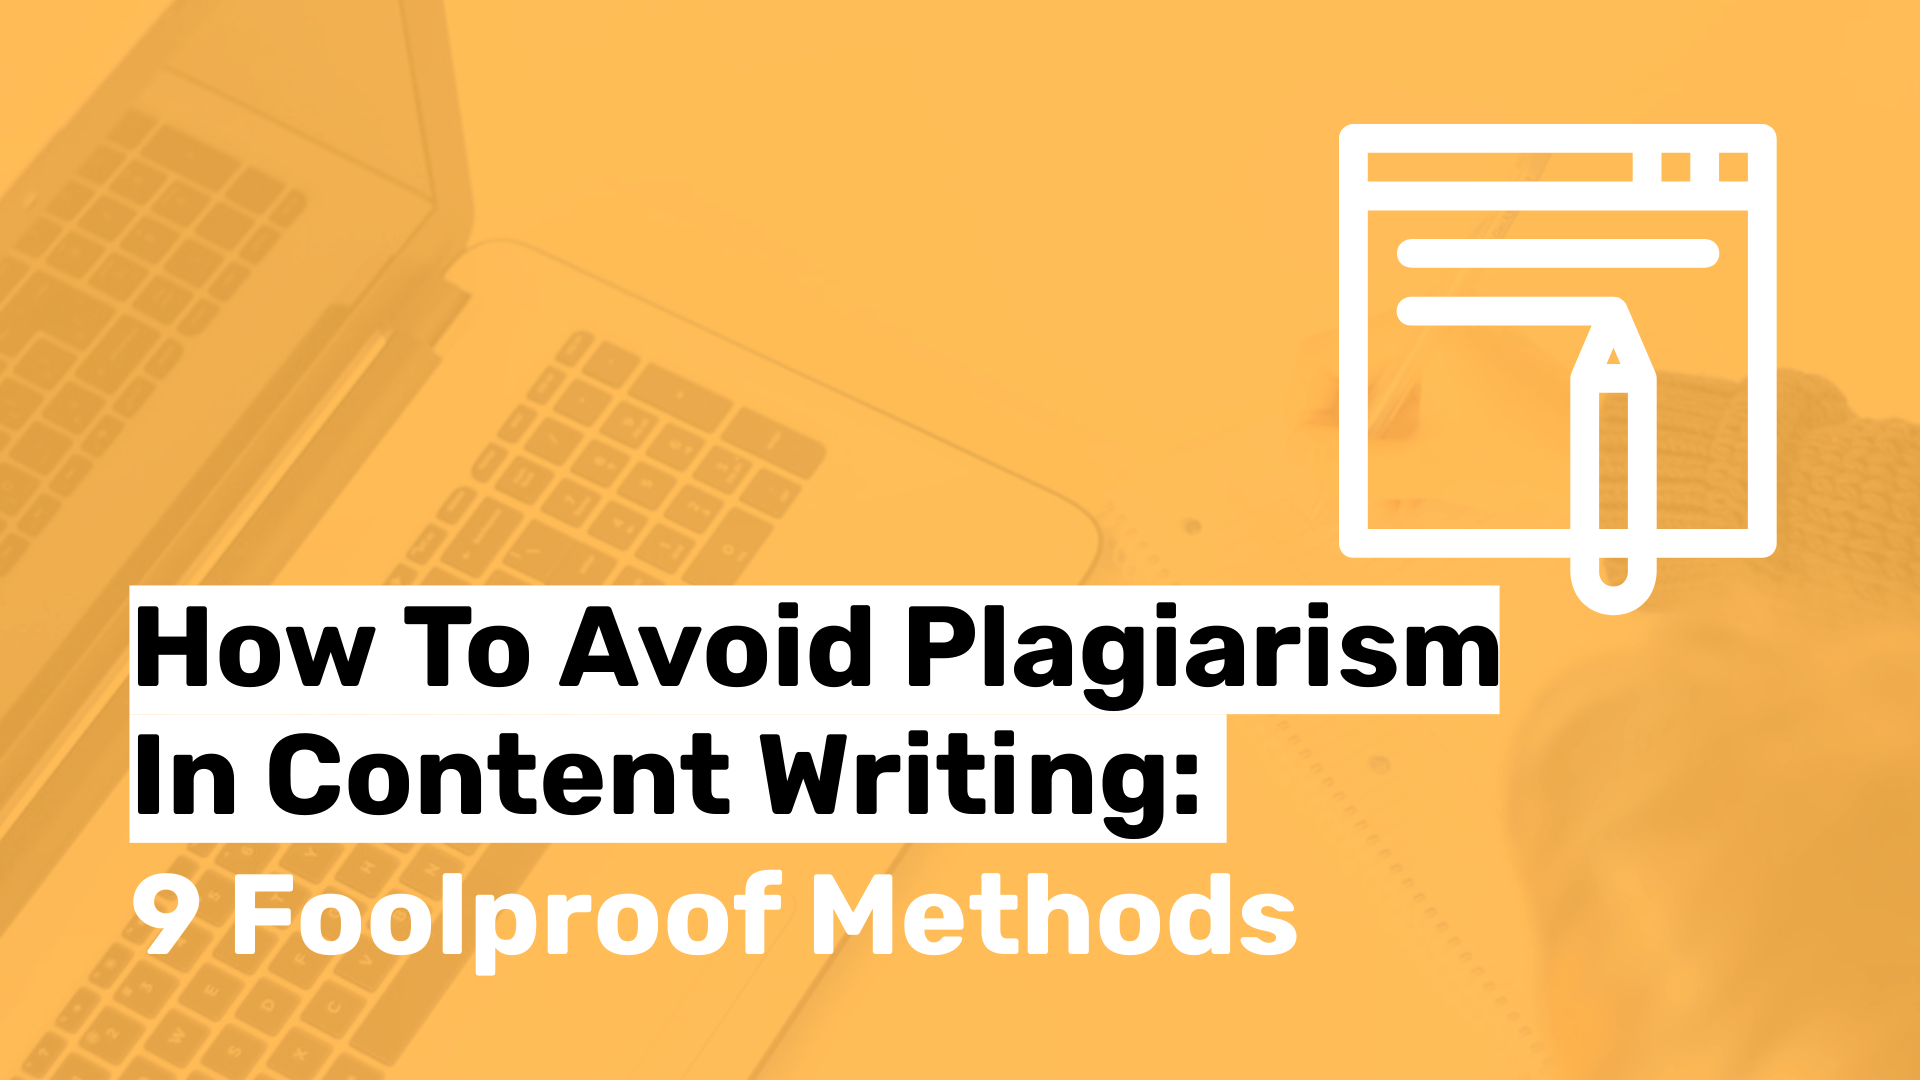 How To Avoid Plagiarism In Content Writing: 9 Foolproof Methods